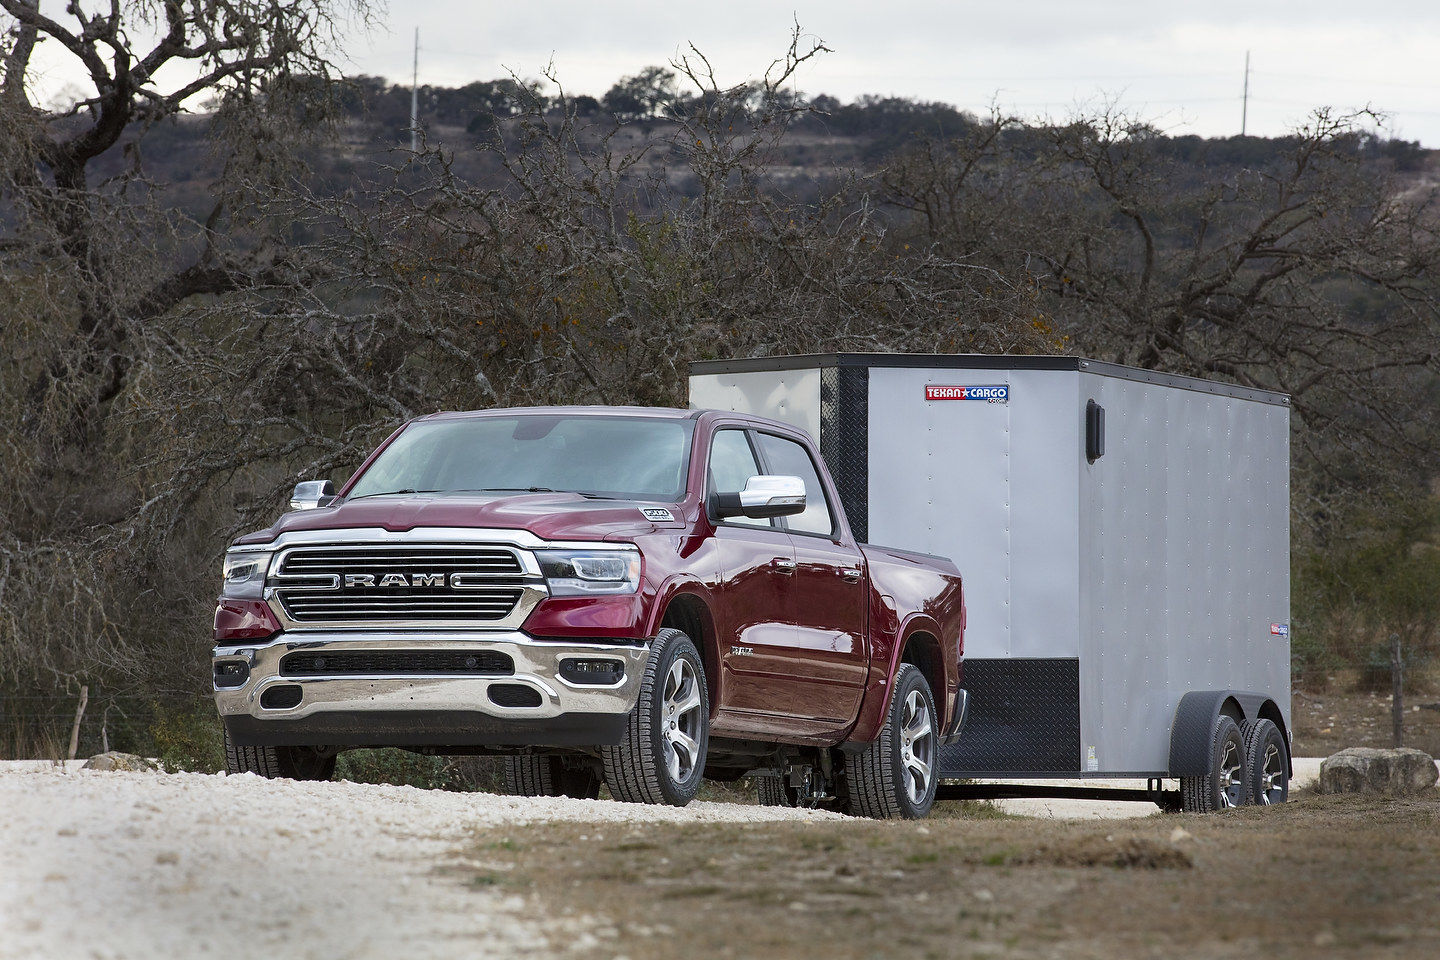 Three reasons to buy a 2021 Ram 1500 instead of a 2021 Ford F-150